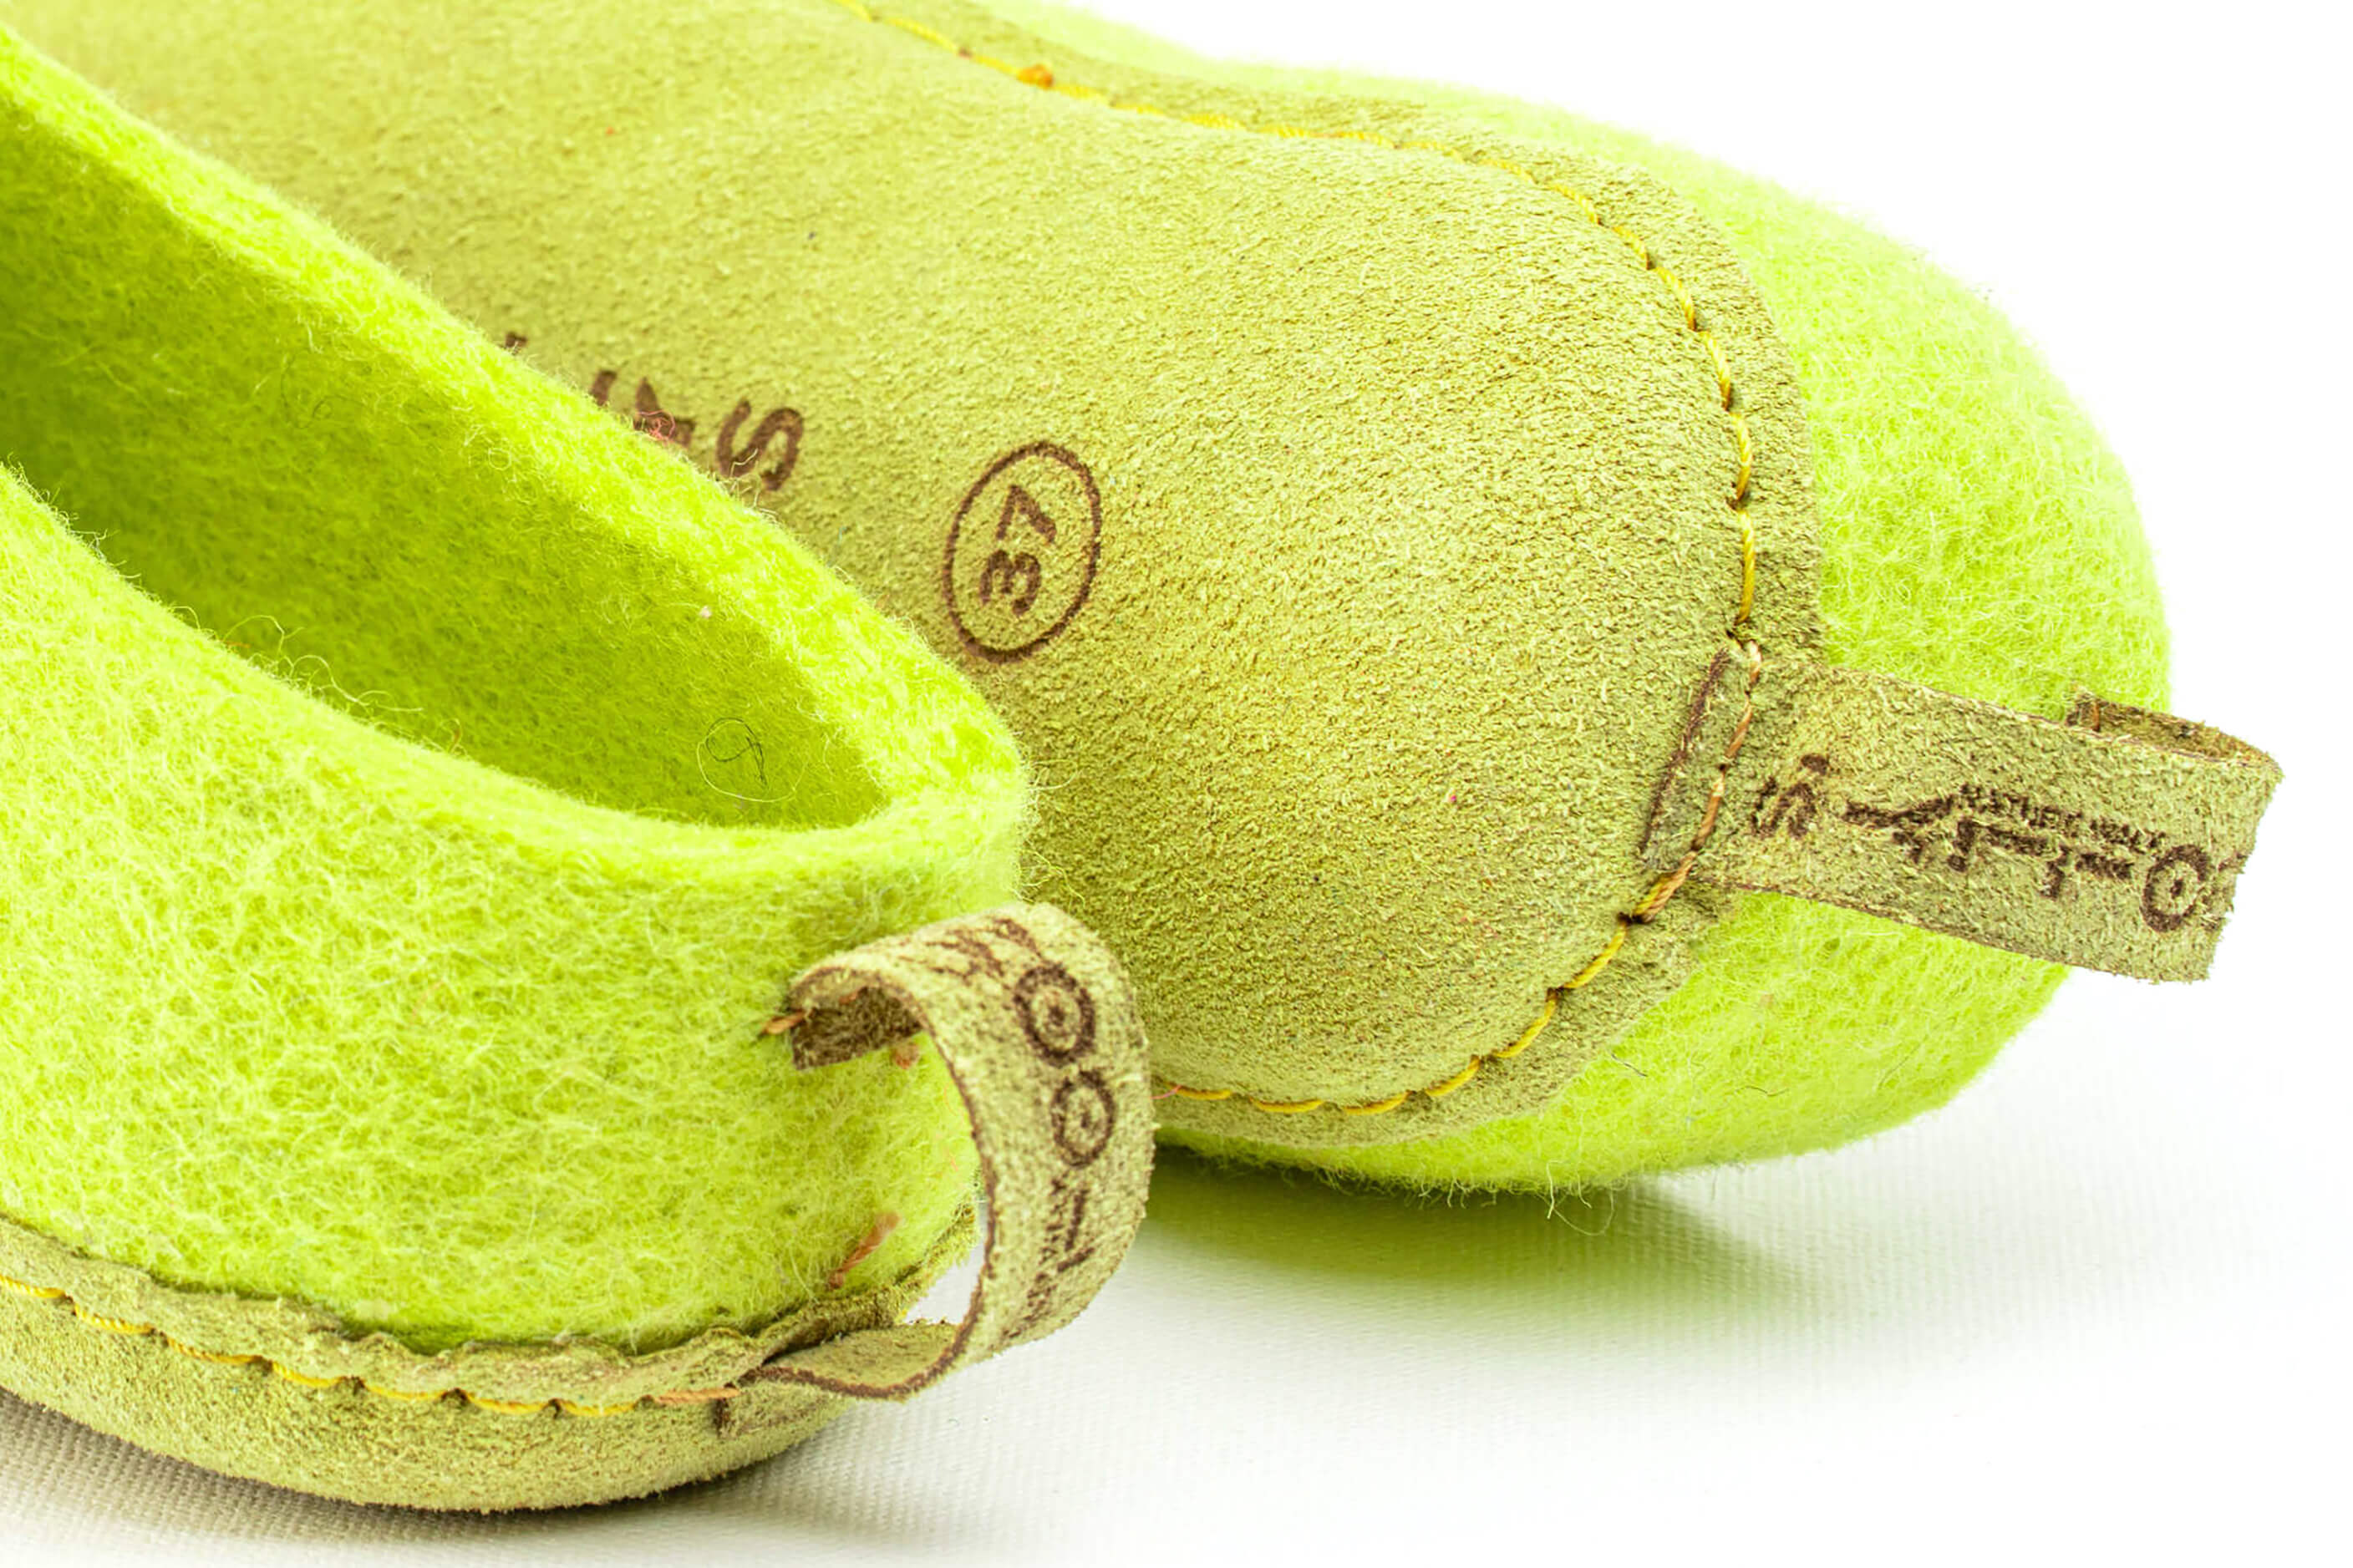 Indoor Open Heel Slippers With Leather Sole - Lime Green